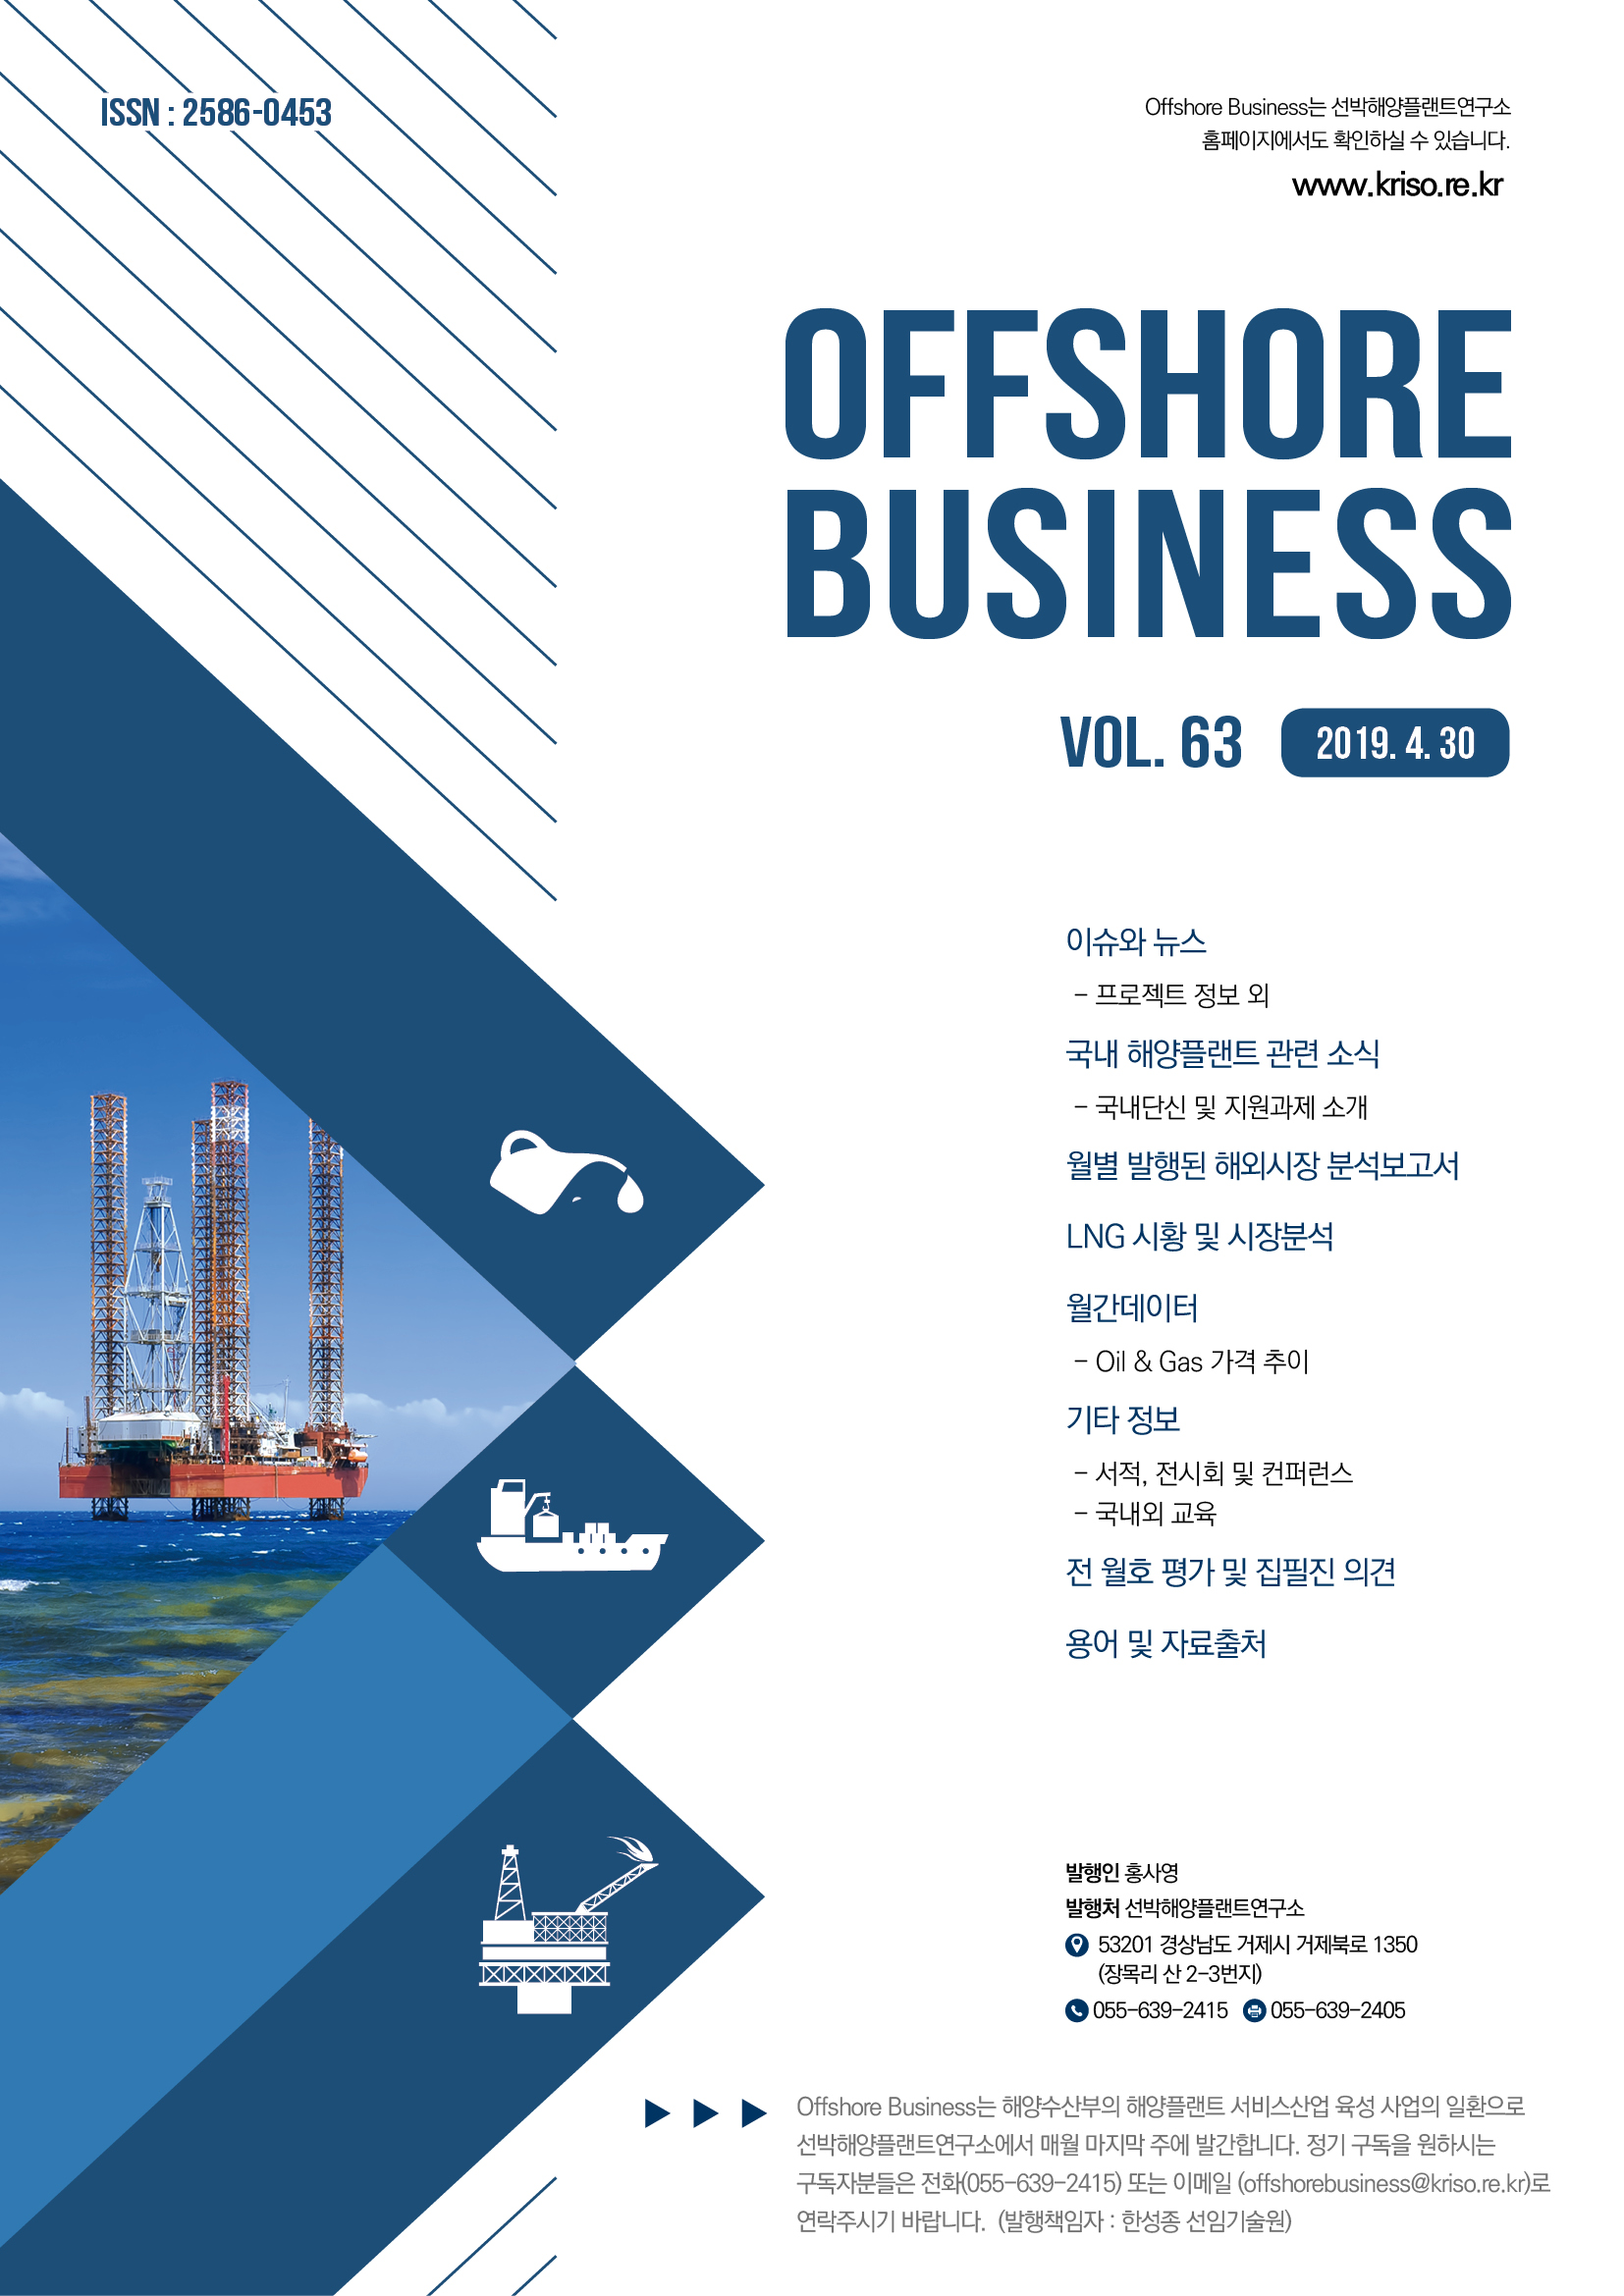 Offshore Business 63호